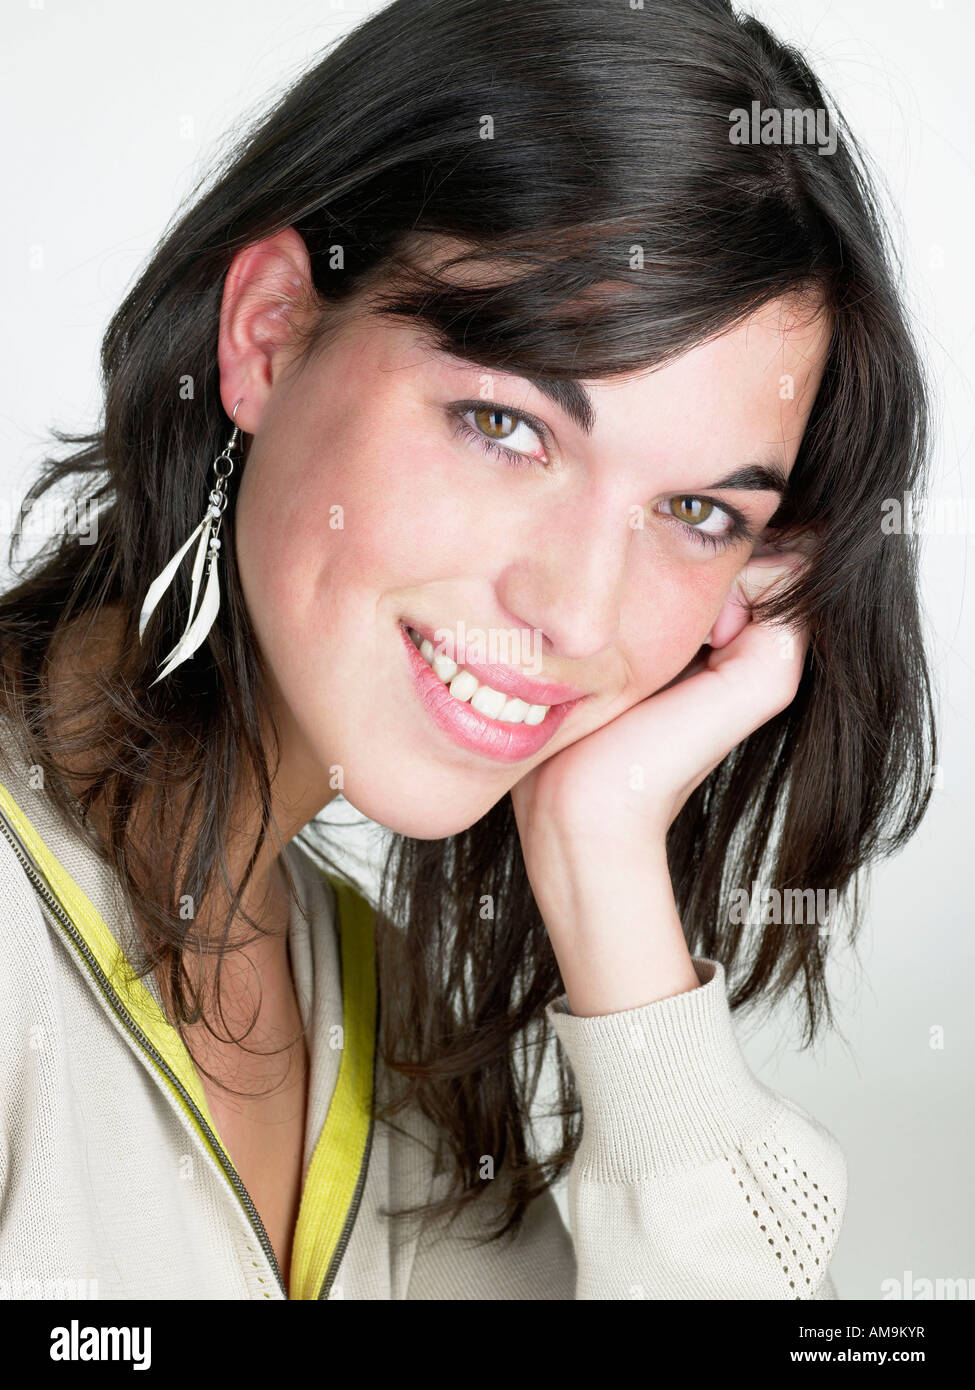 Woman smiling resting head on hand. Stock Photo